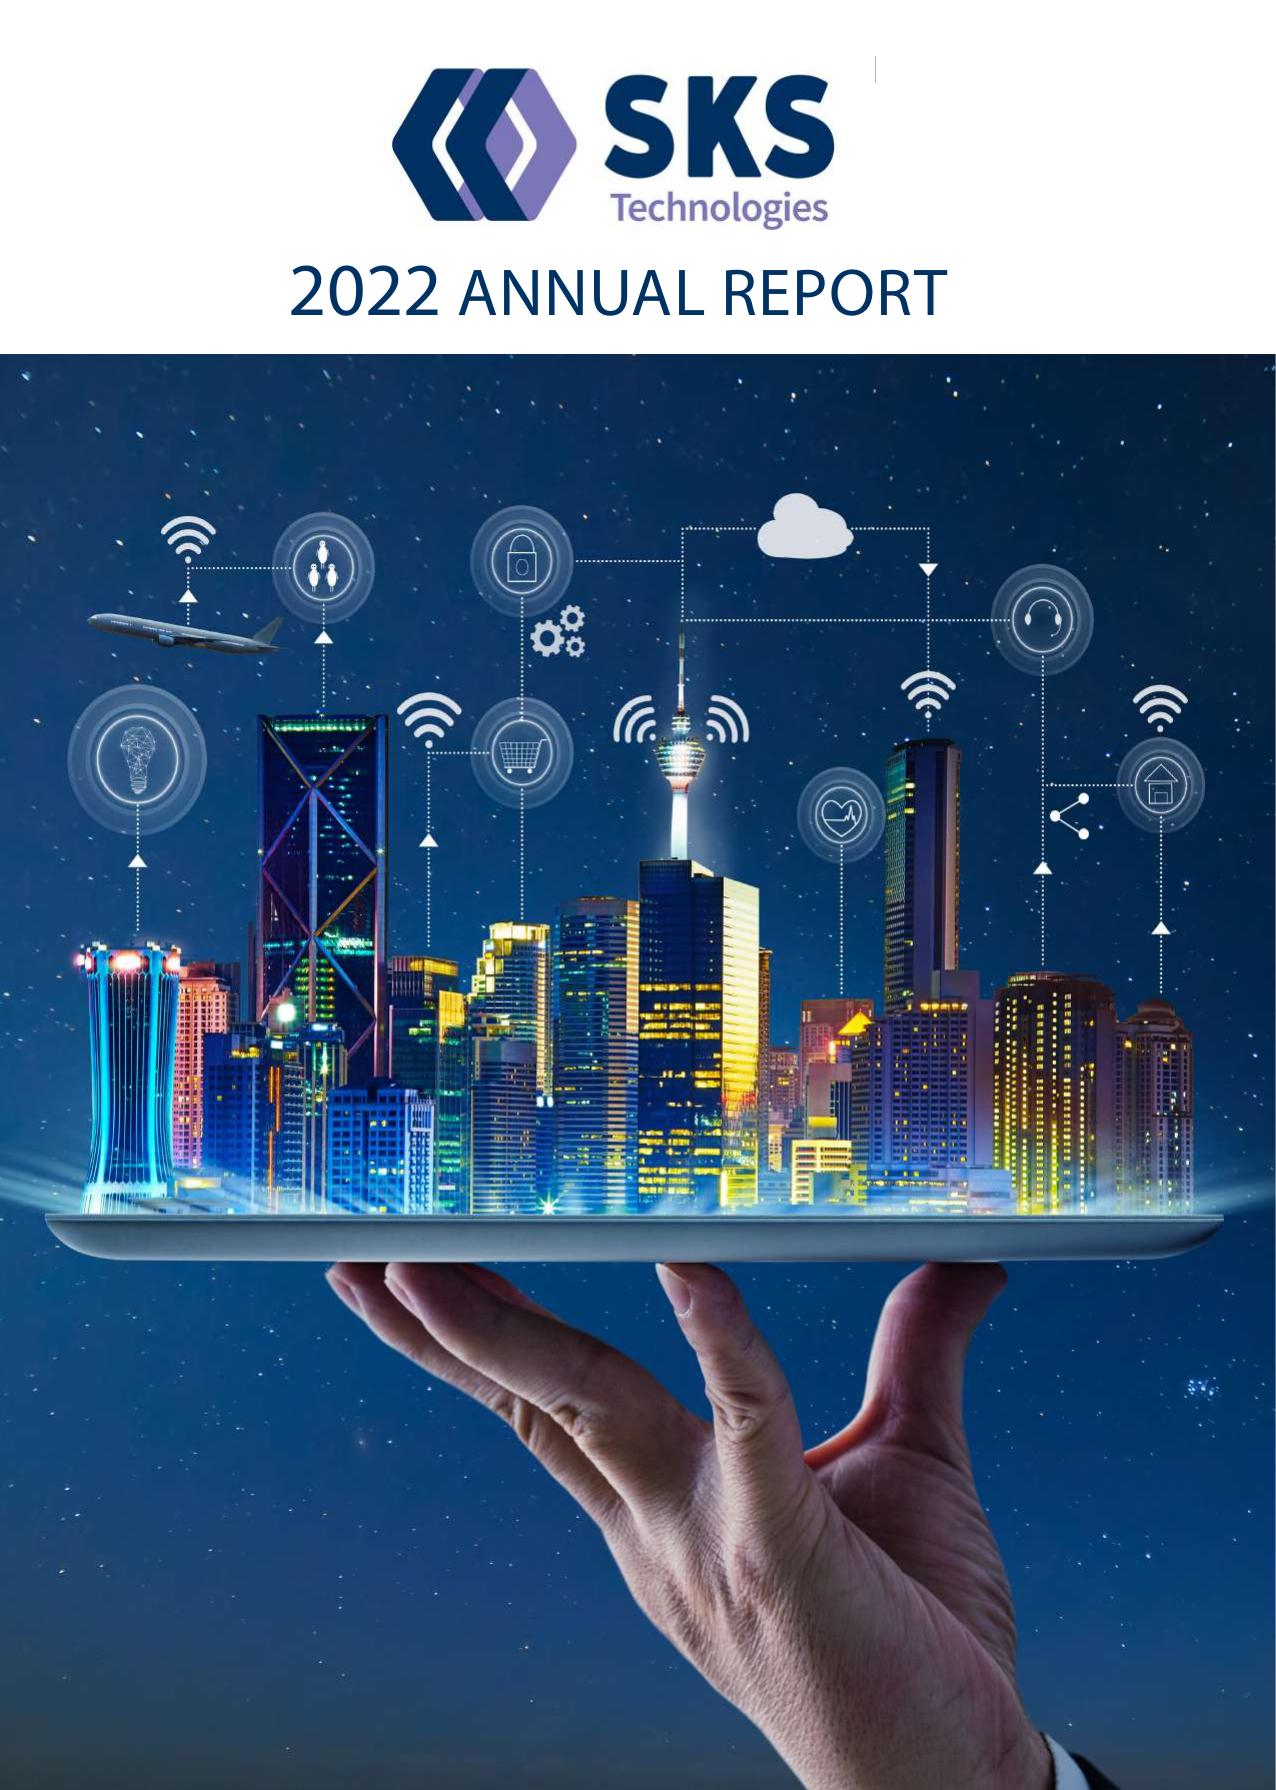 SKS 2022 Annual Report